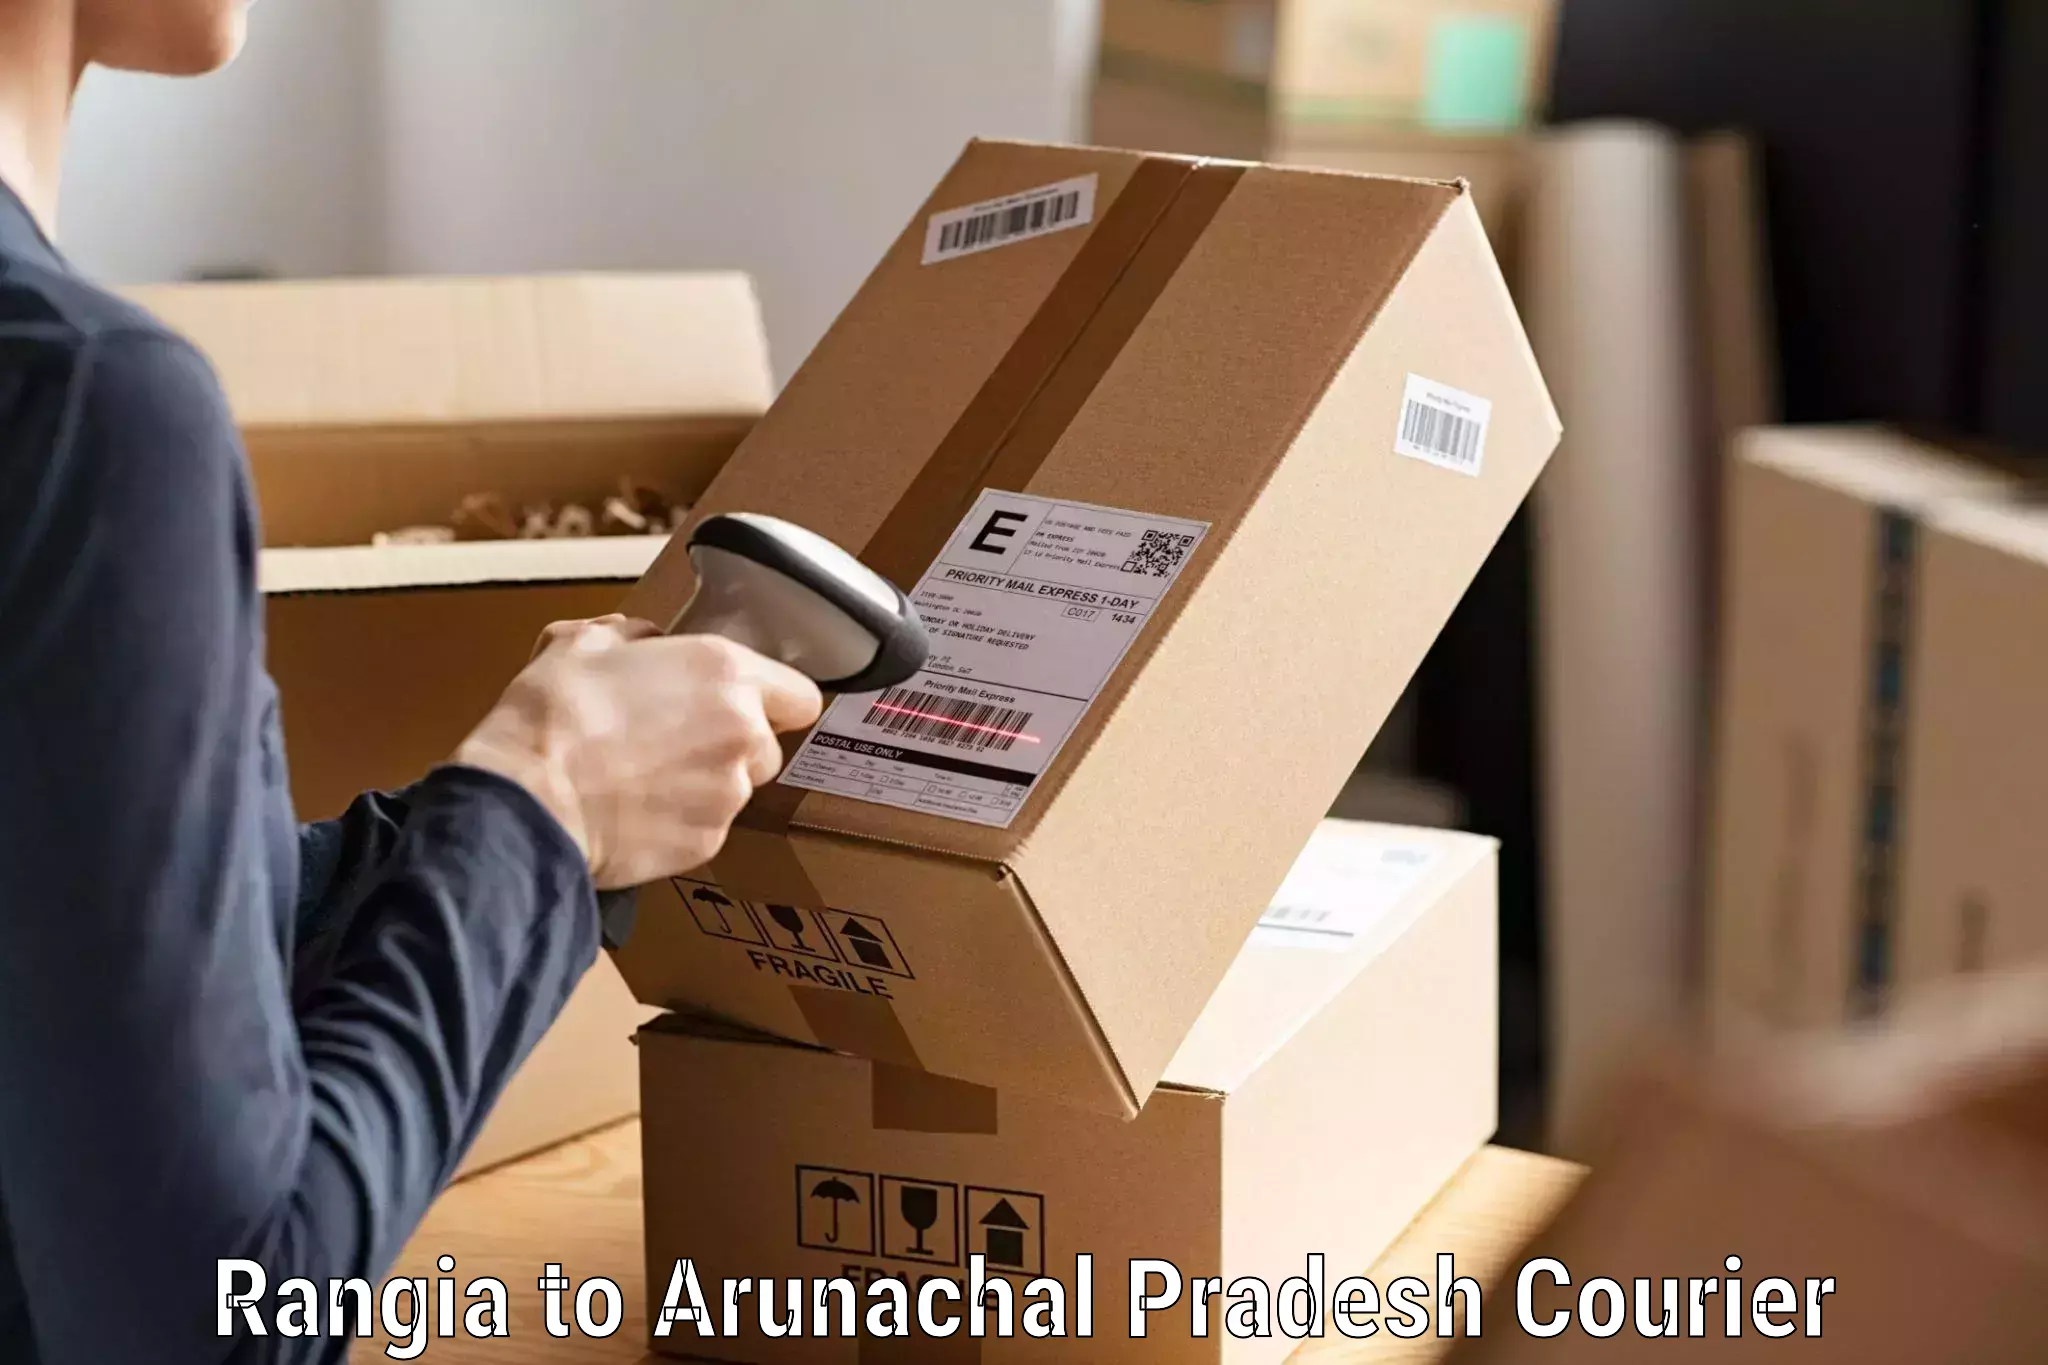 24-hour courier service Rangia to Yingkiong